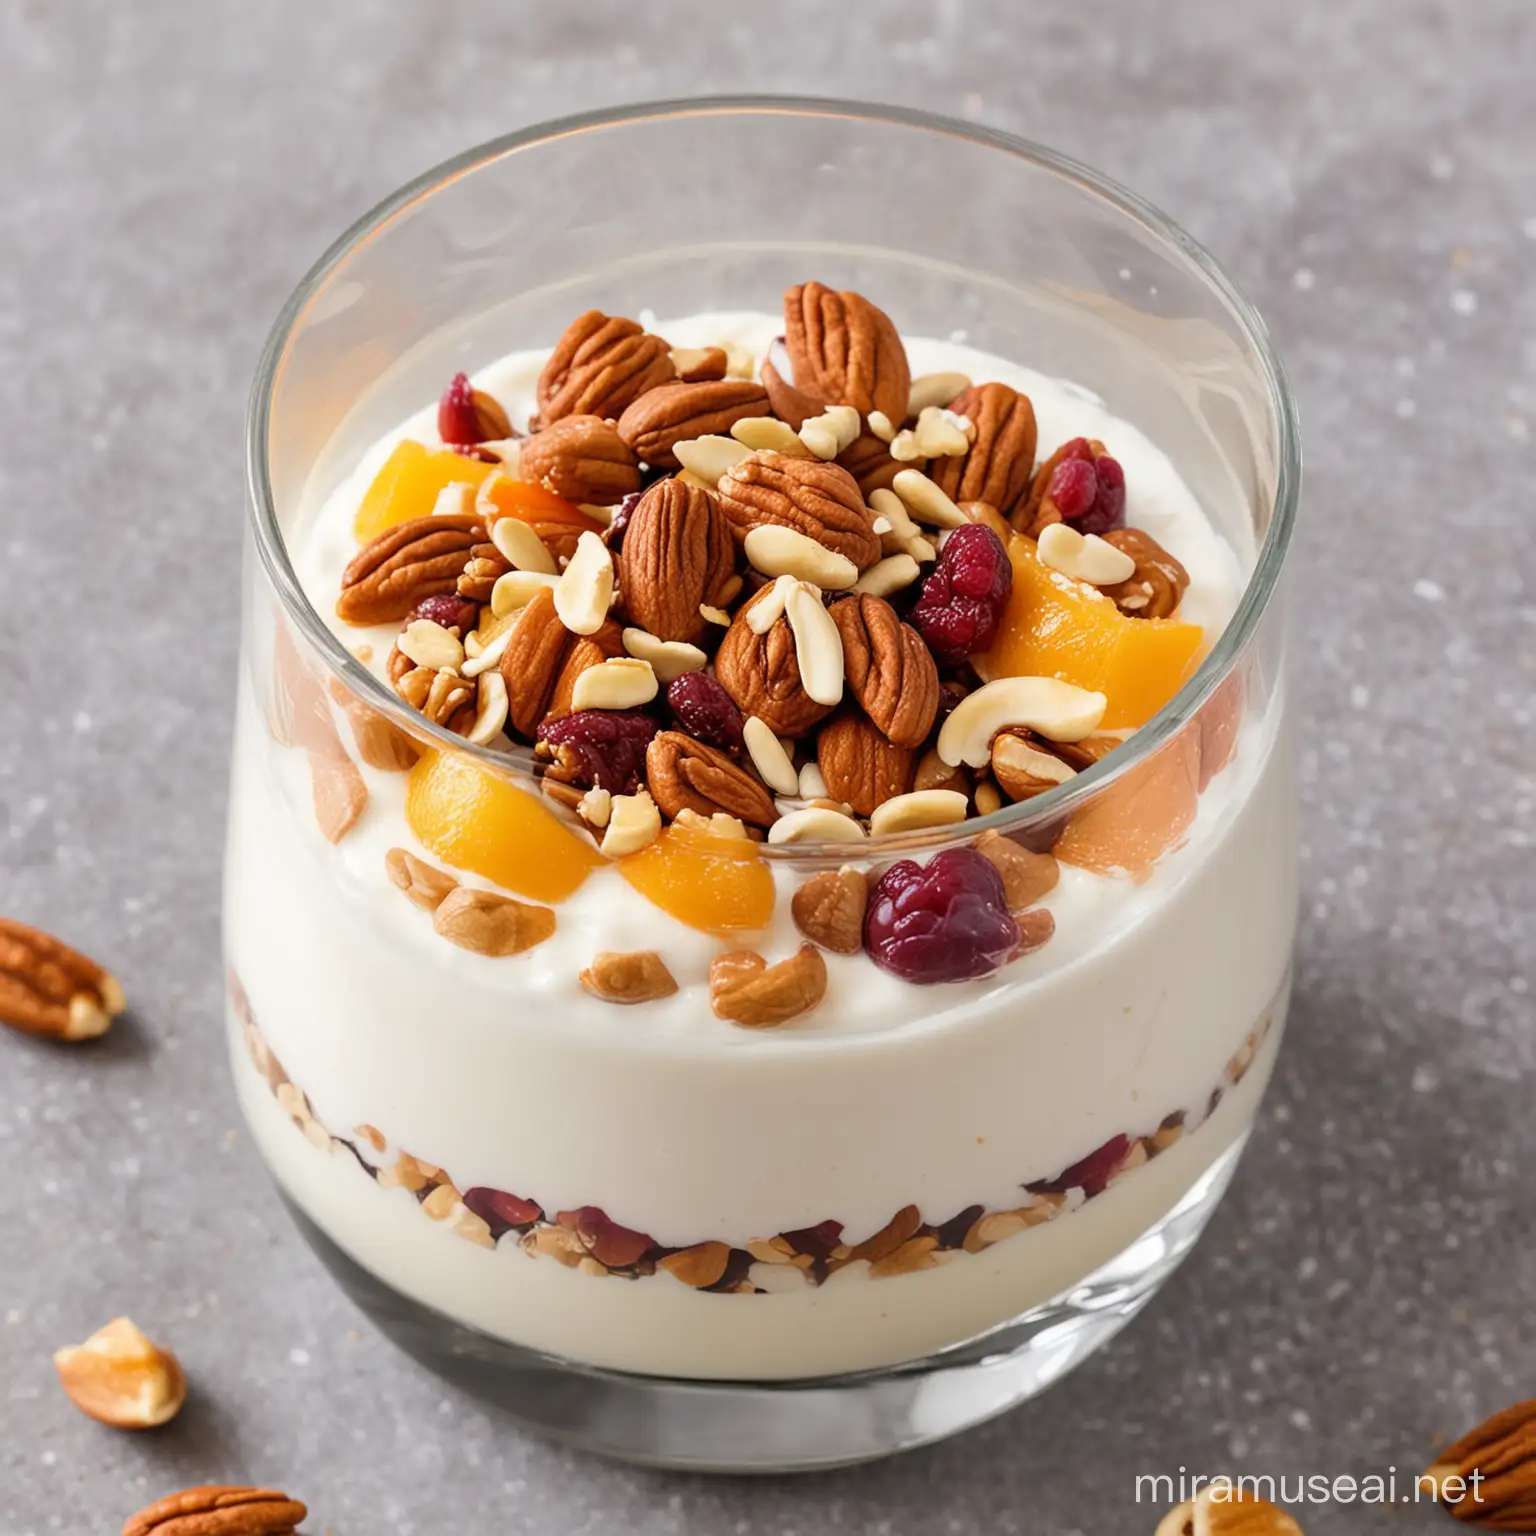 Healthy Fruit Parfait Freshly Chopped Fruits Layered with Creamy Yogurt and Nuts